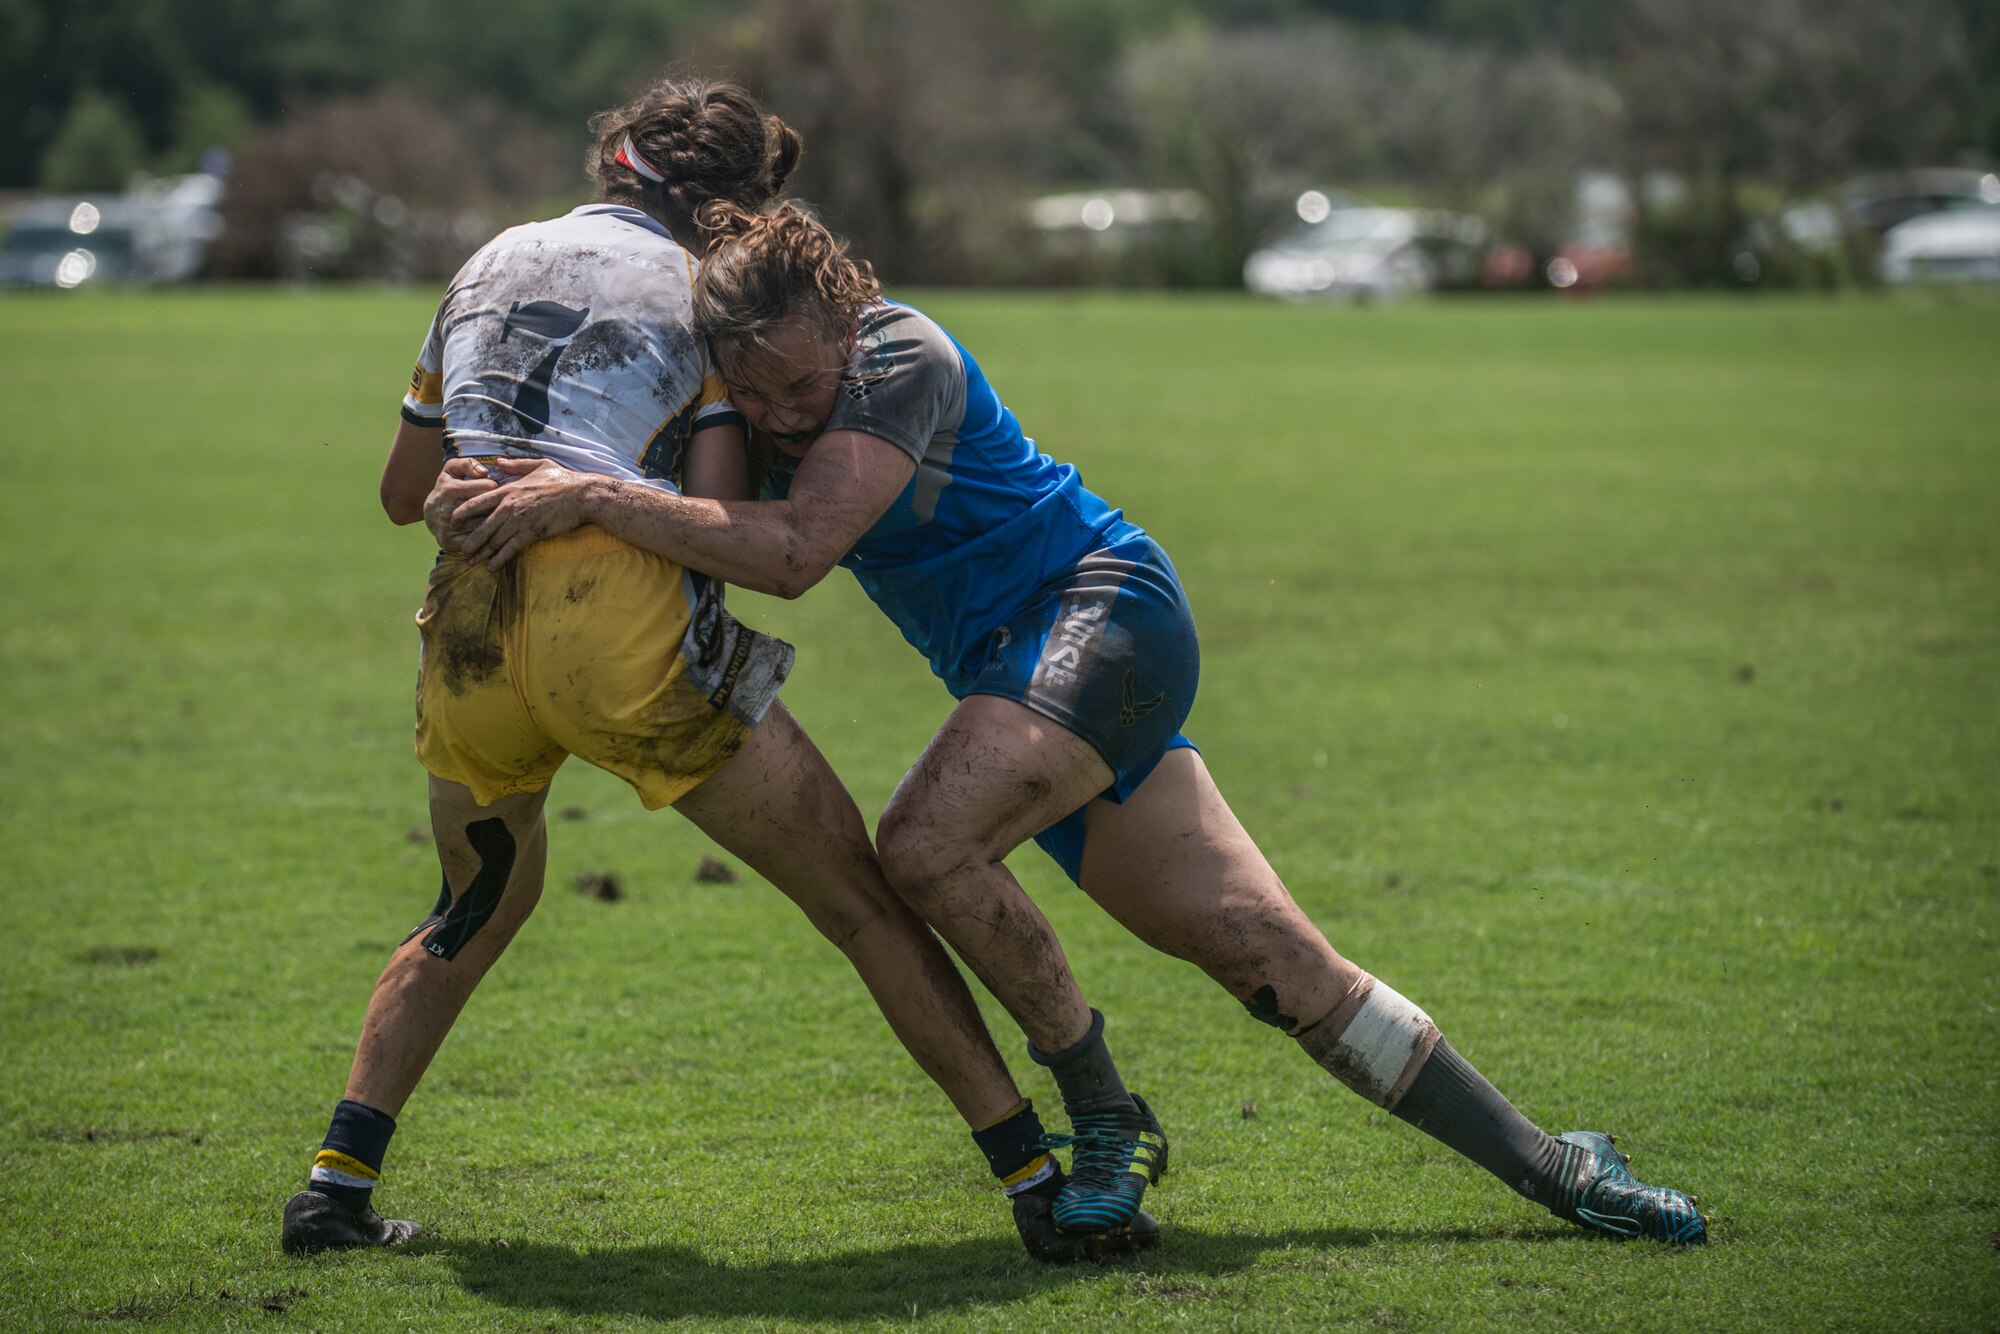 An Air Force rugby player tackles a Navy rugby player during a tournament